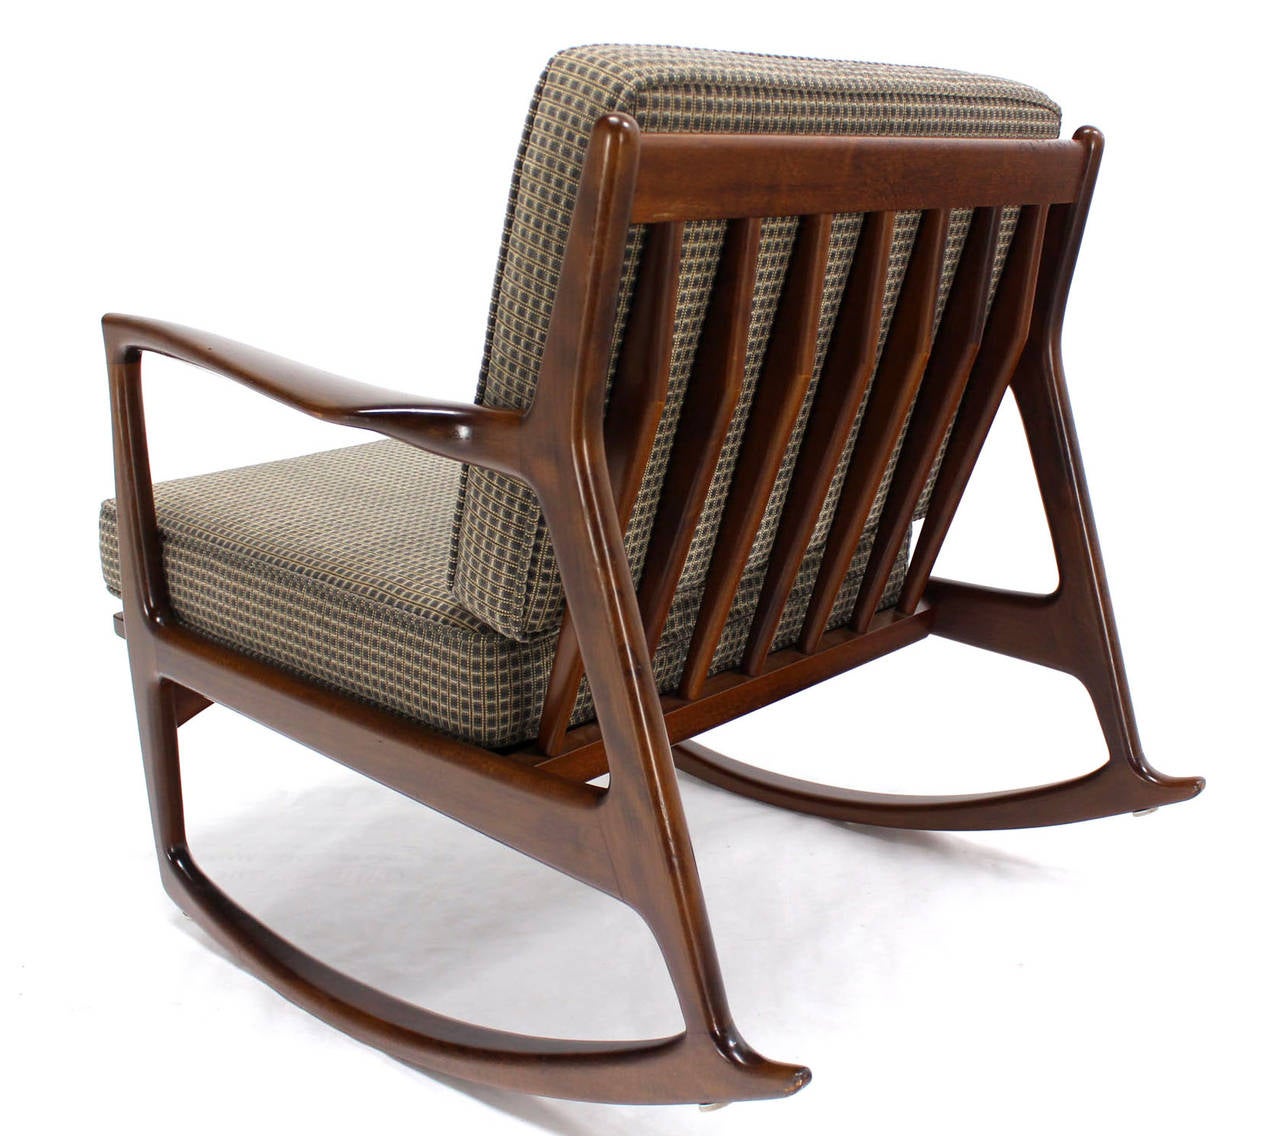 Danish Modern Mid-Century Rocking Chair by Selig at 1stdibs